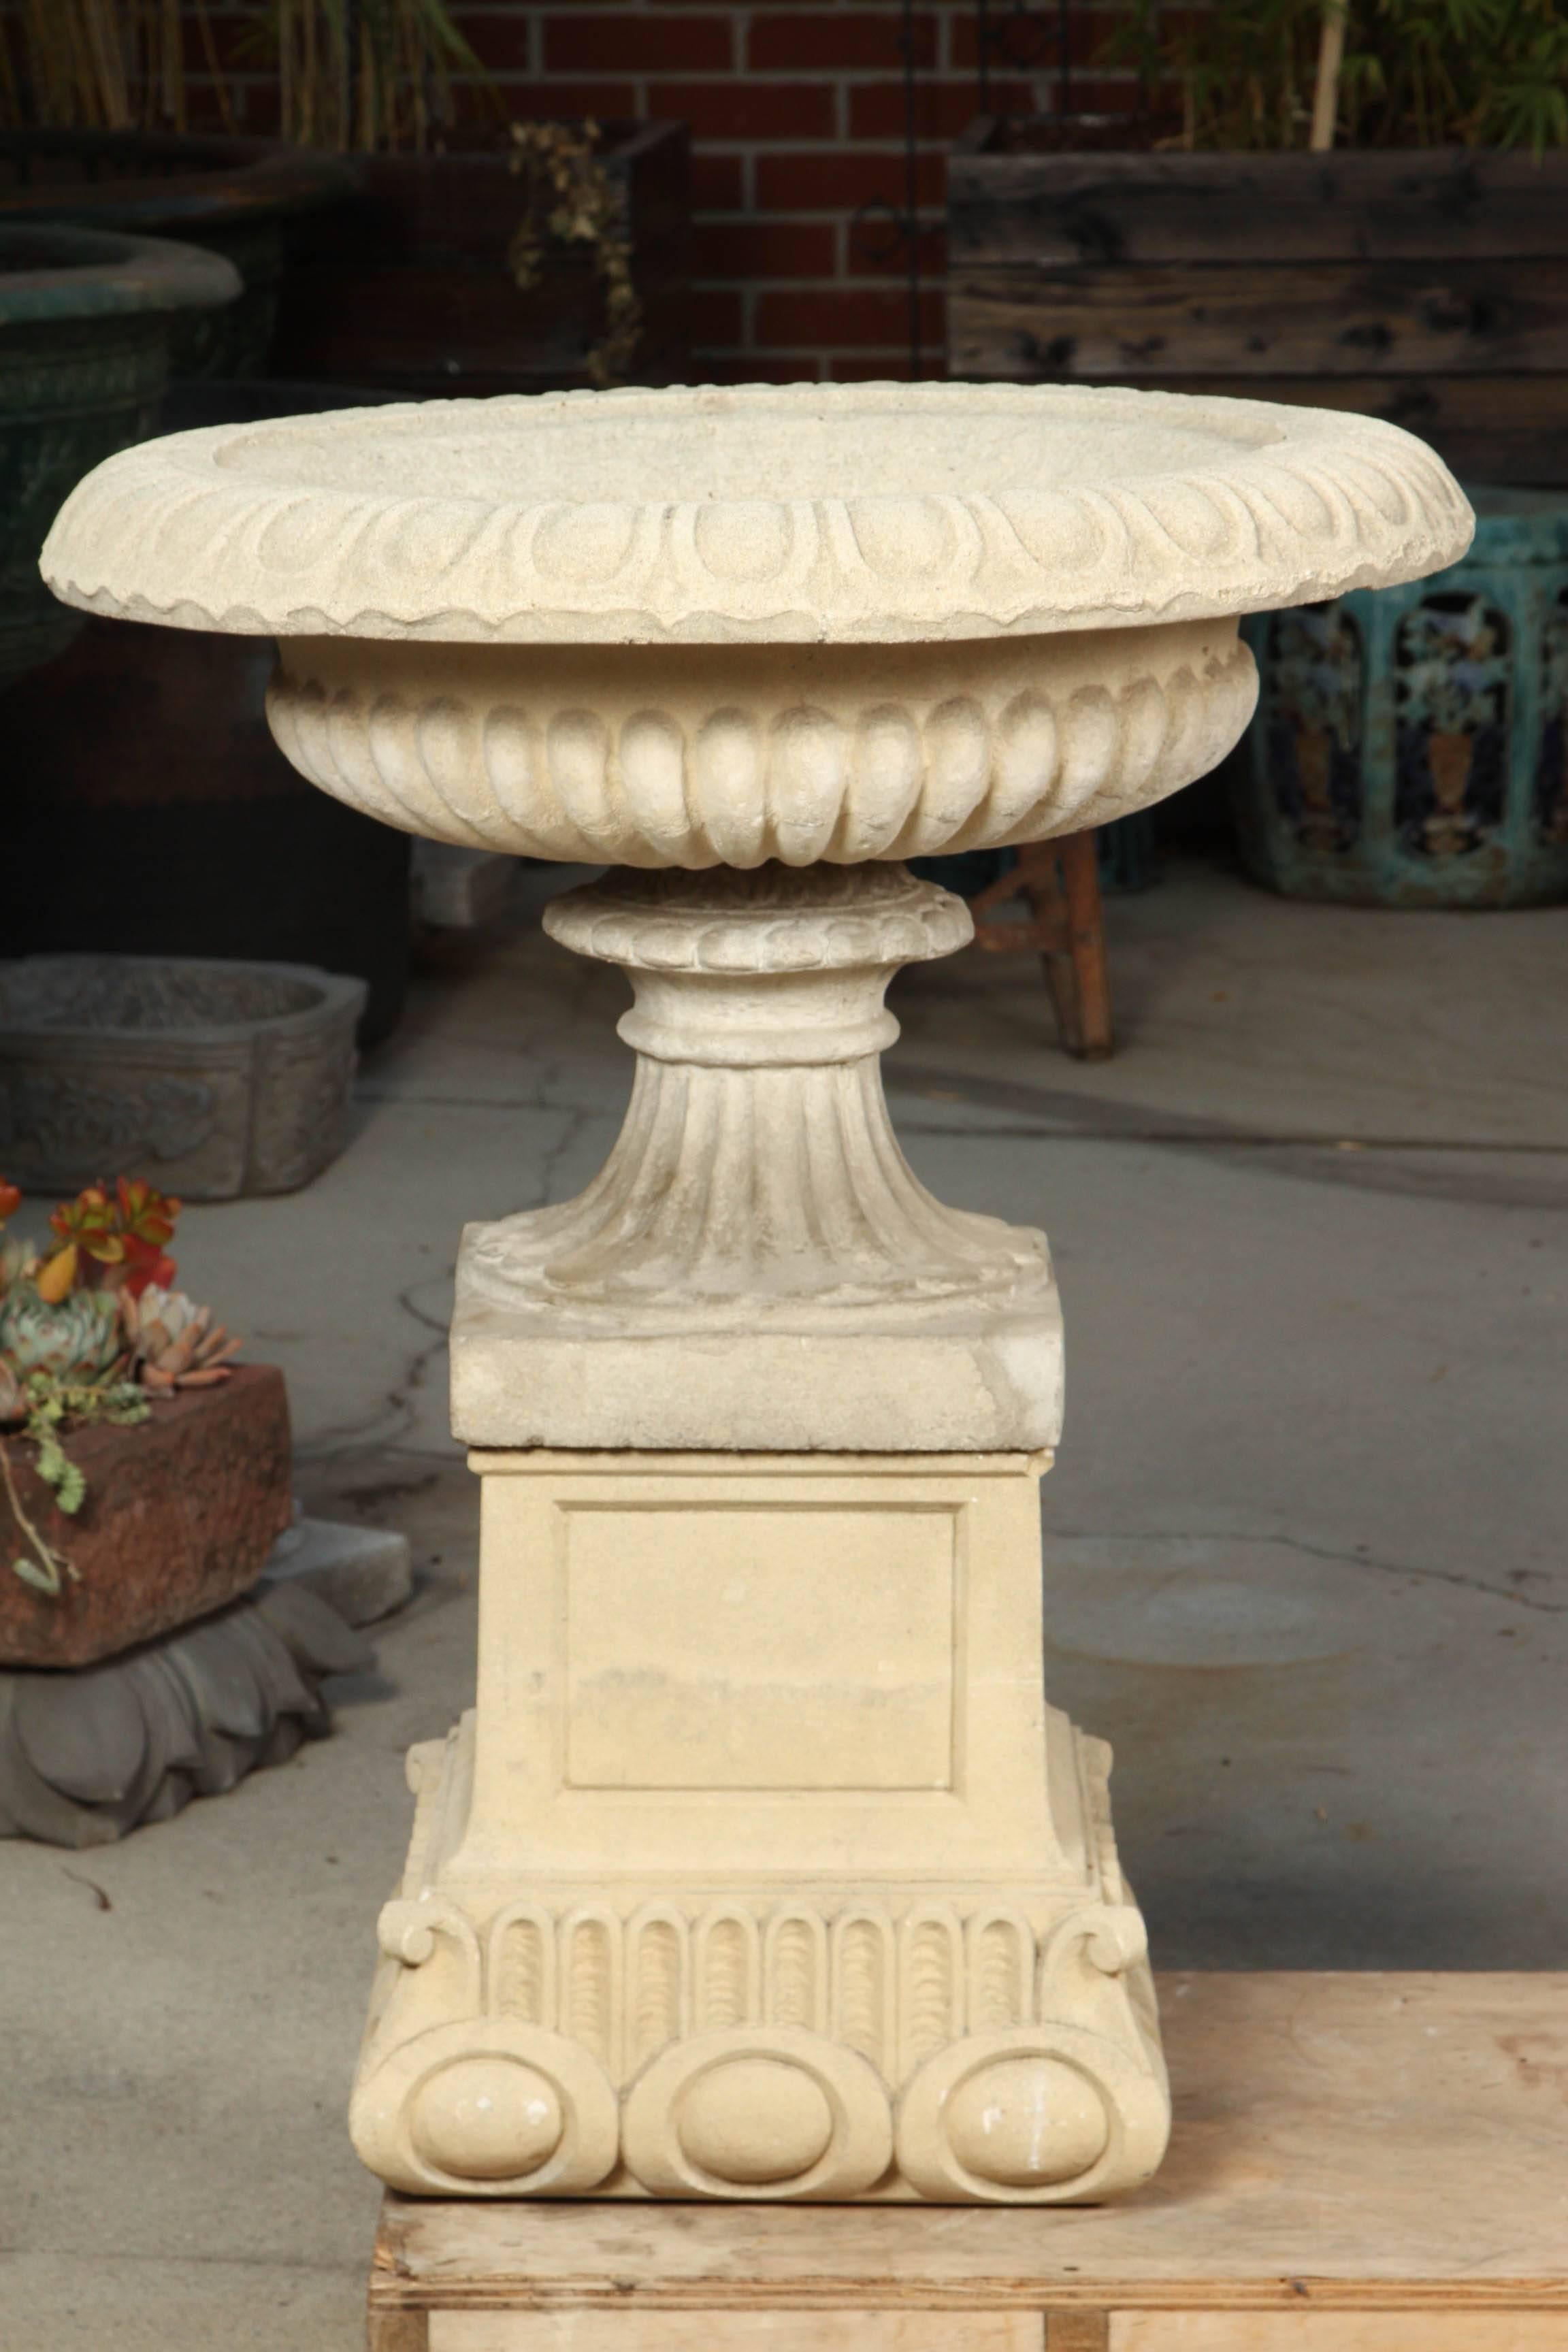 Of classic form on later bases of cast material similar to Haddenstone.